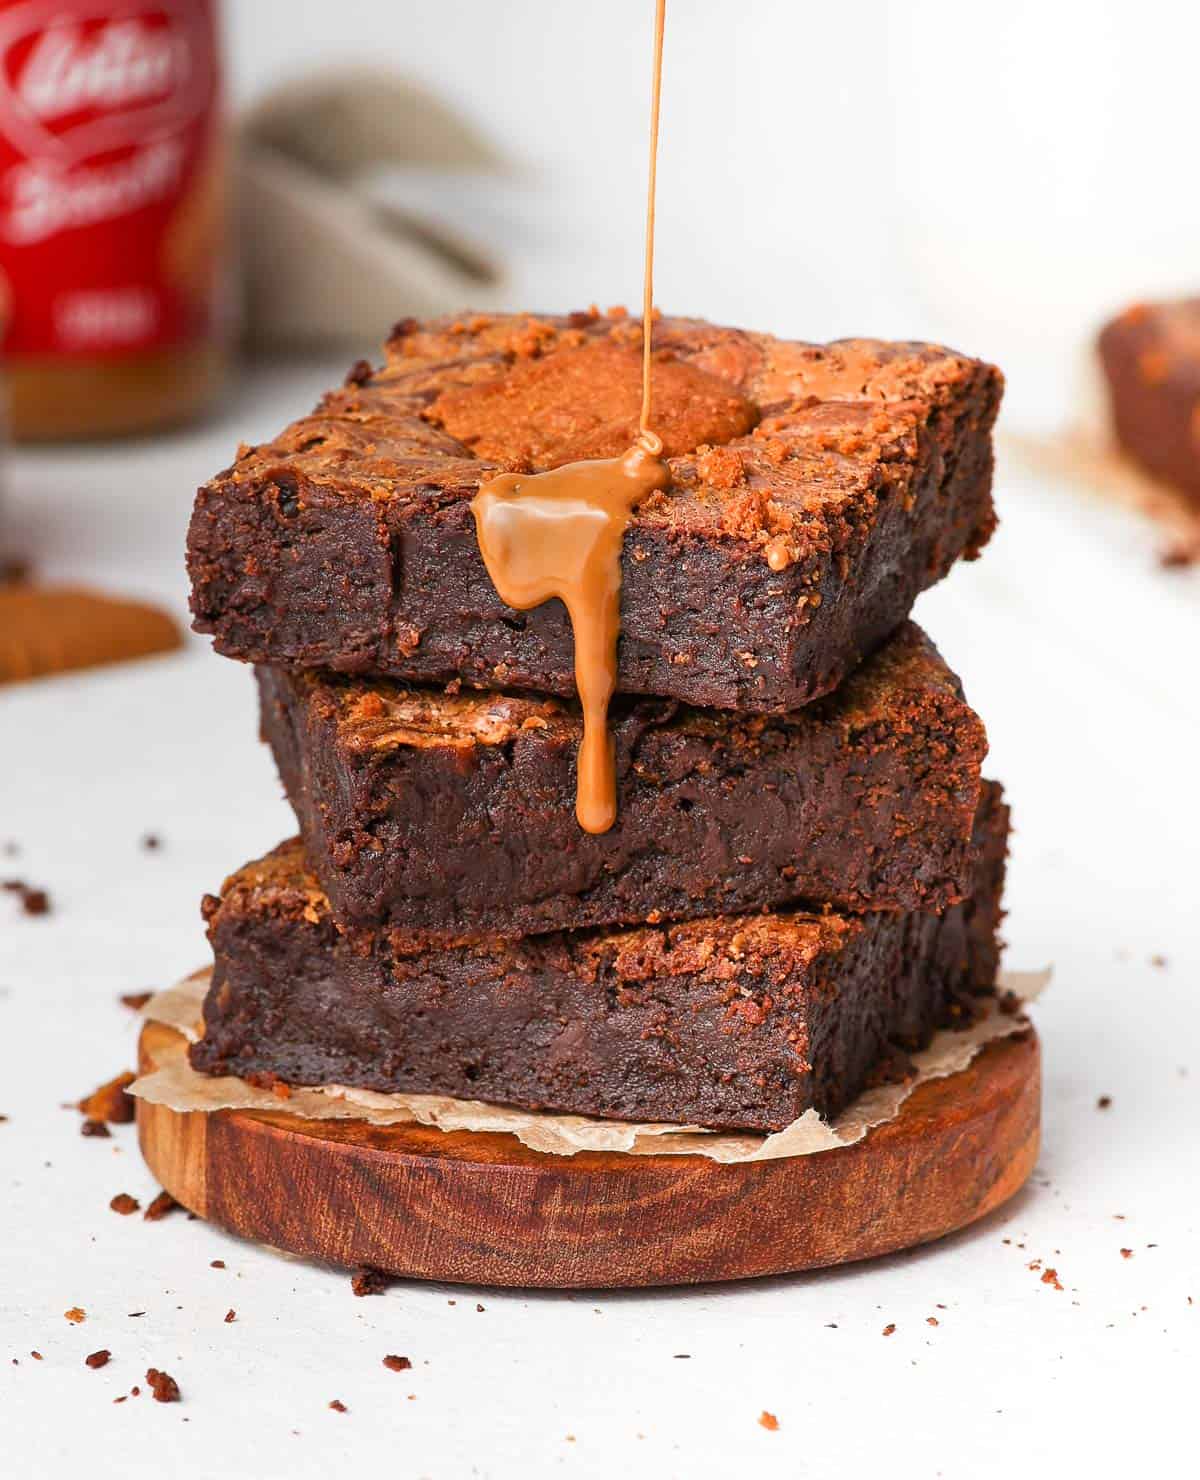 Pouring biscoff spread over a stack of three brownie slices.